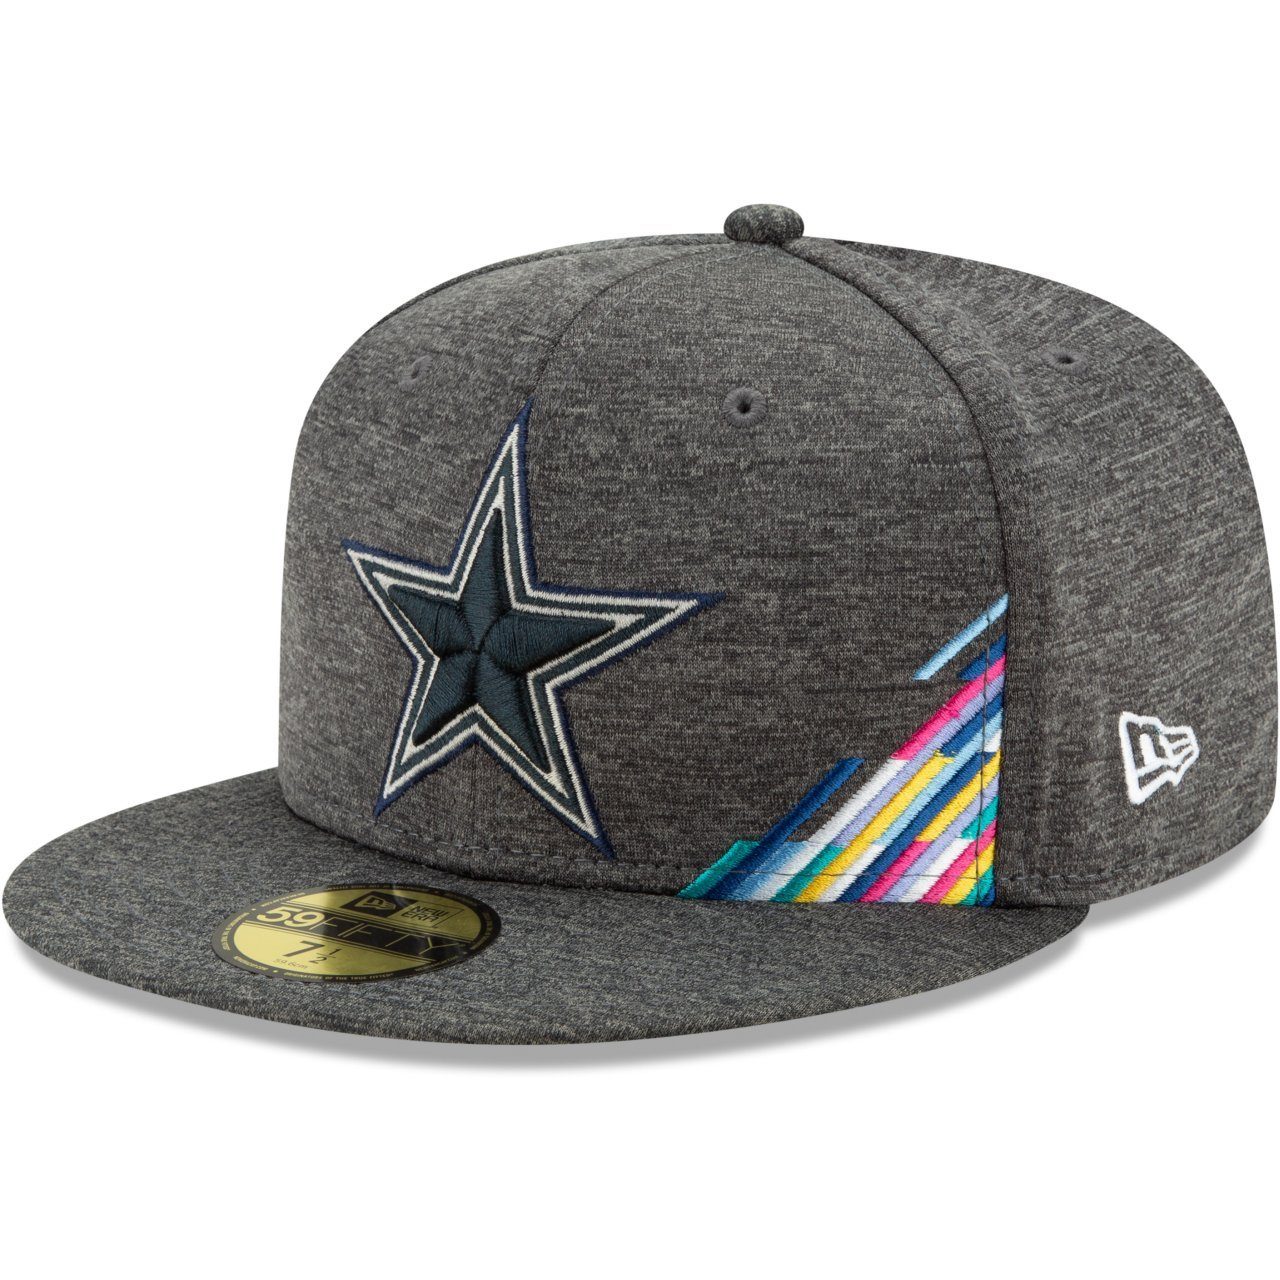 New Era Fitted Cap 59Fifty CRUCIAL CATCH NFL Teams Dallas Cowboys